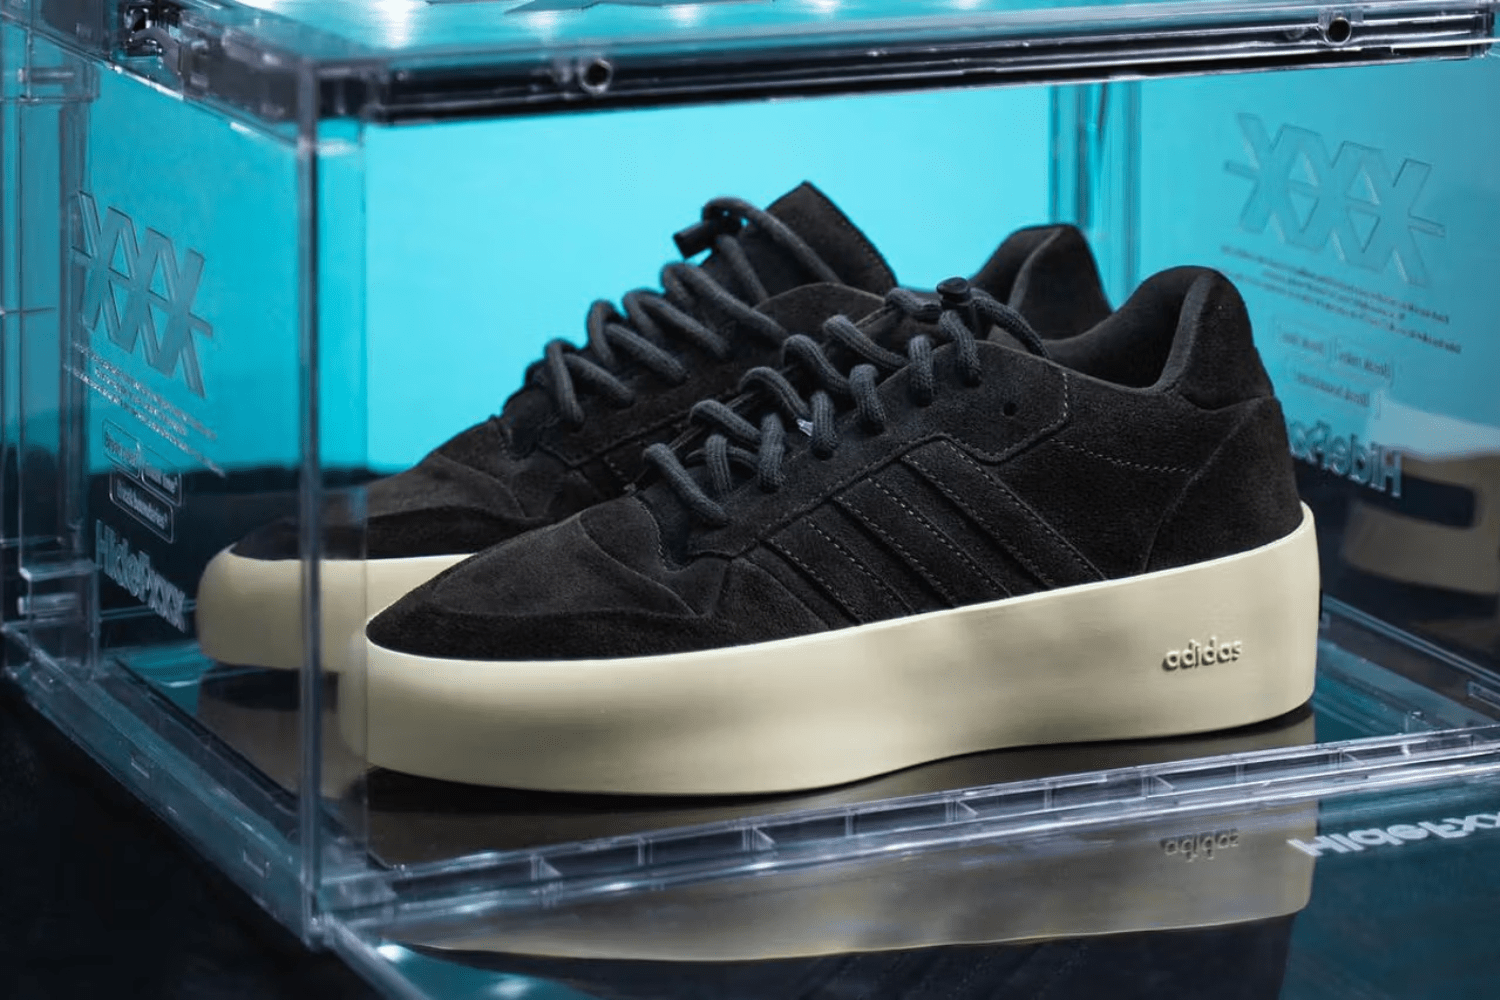 The Fear of God x adidas Rivalry Low 86 appears in a black colorway